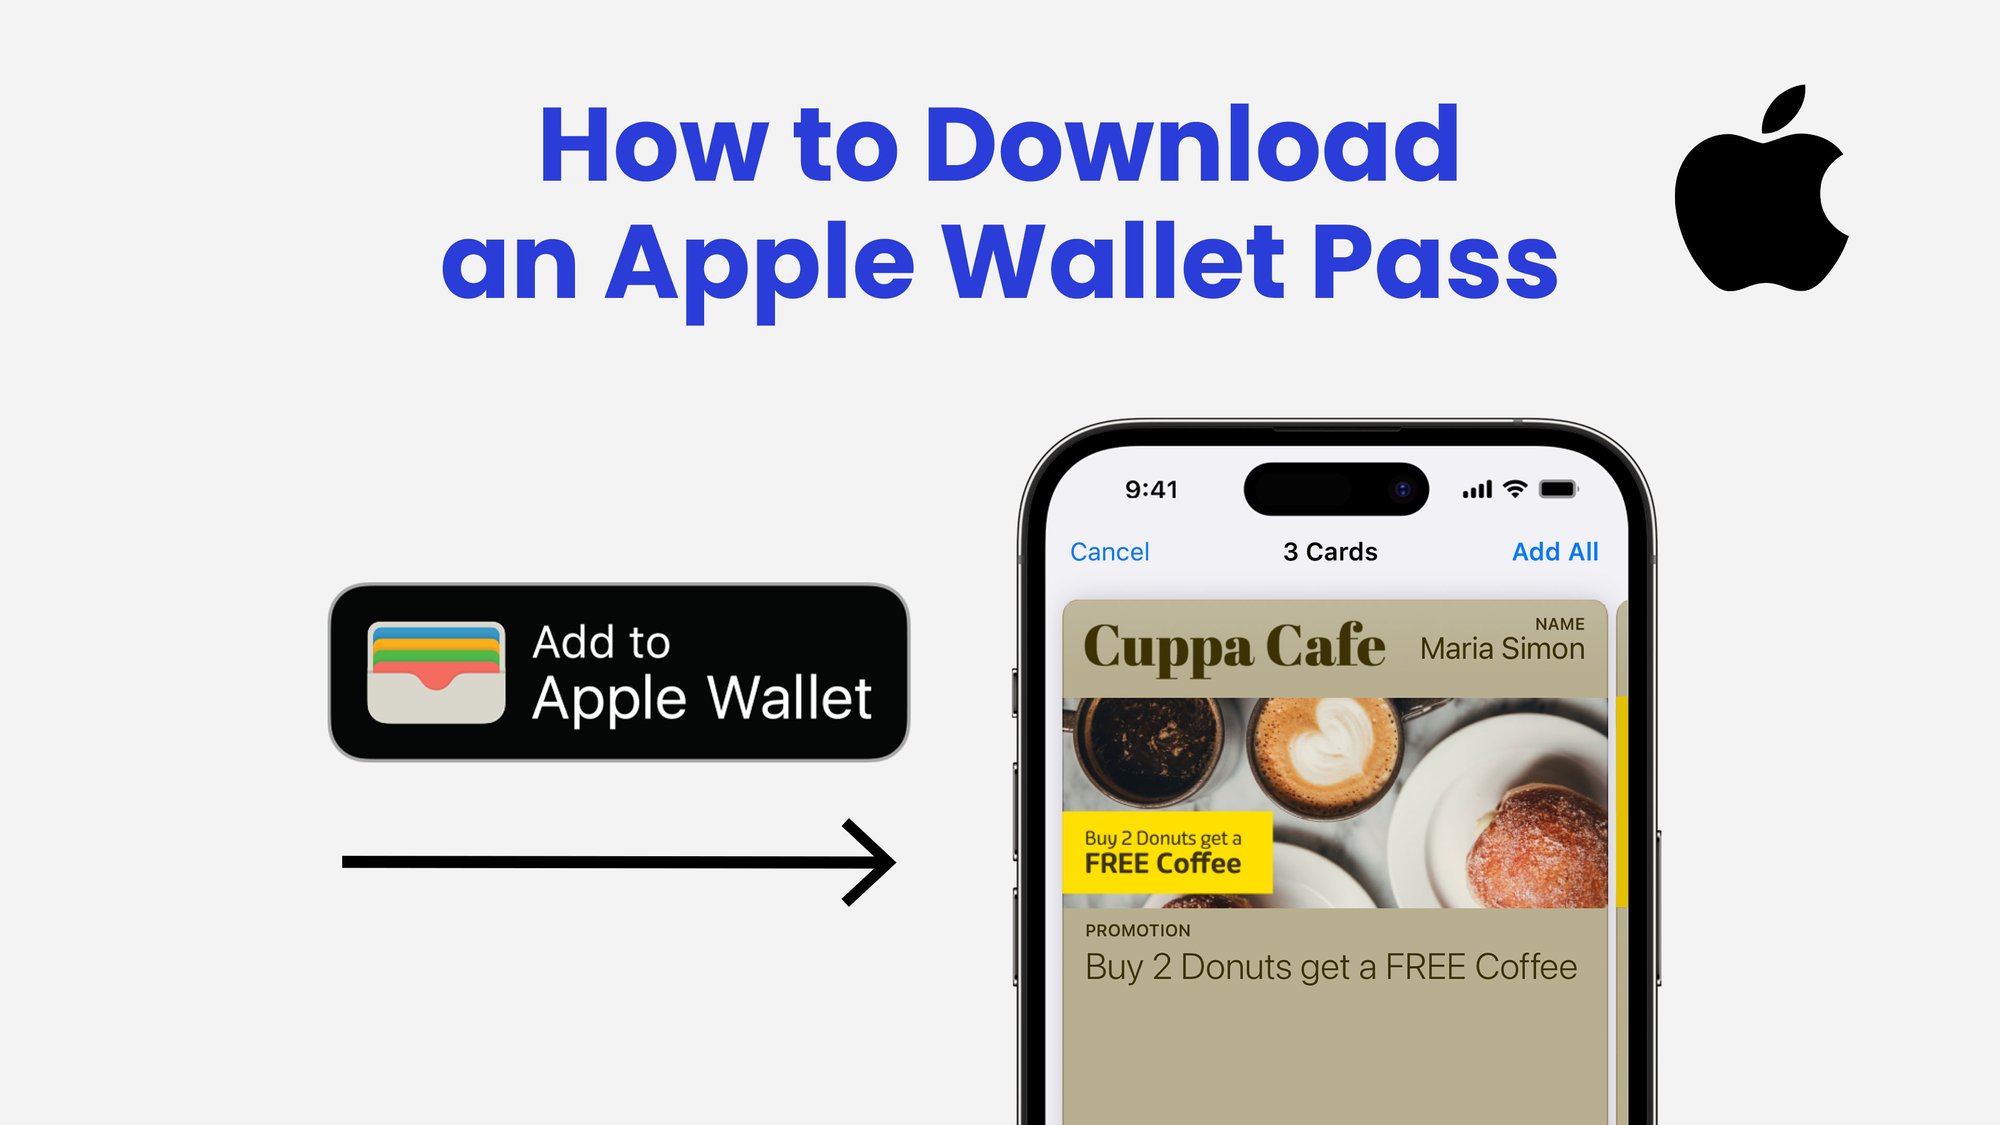 How to Download an Apple Wallet Pass